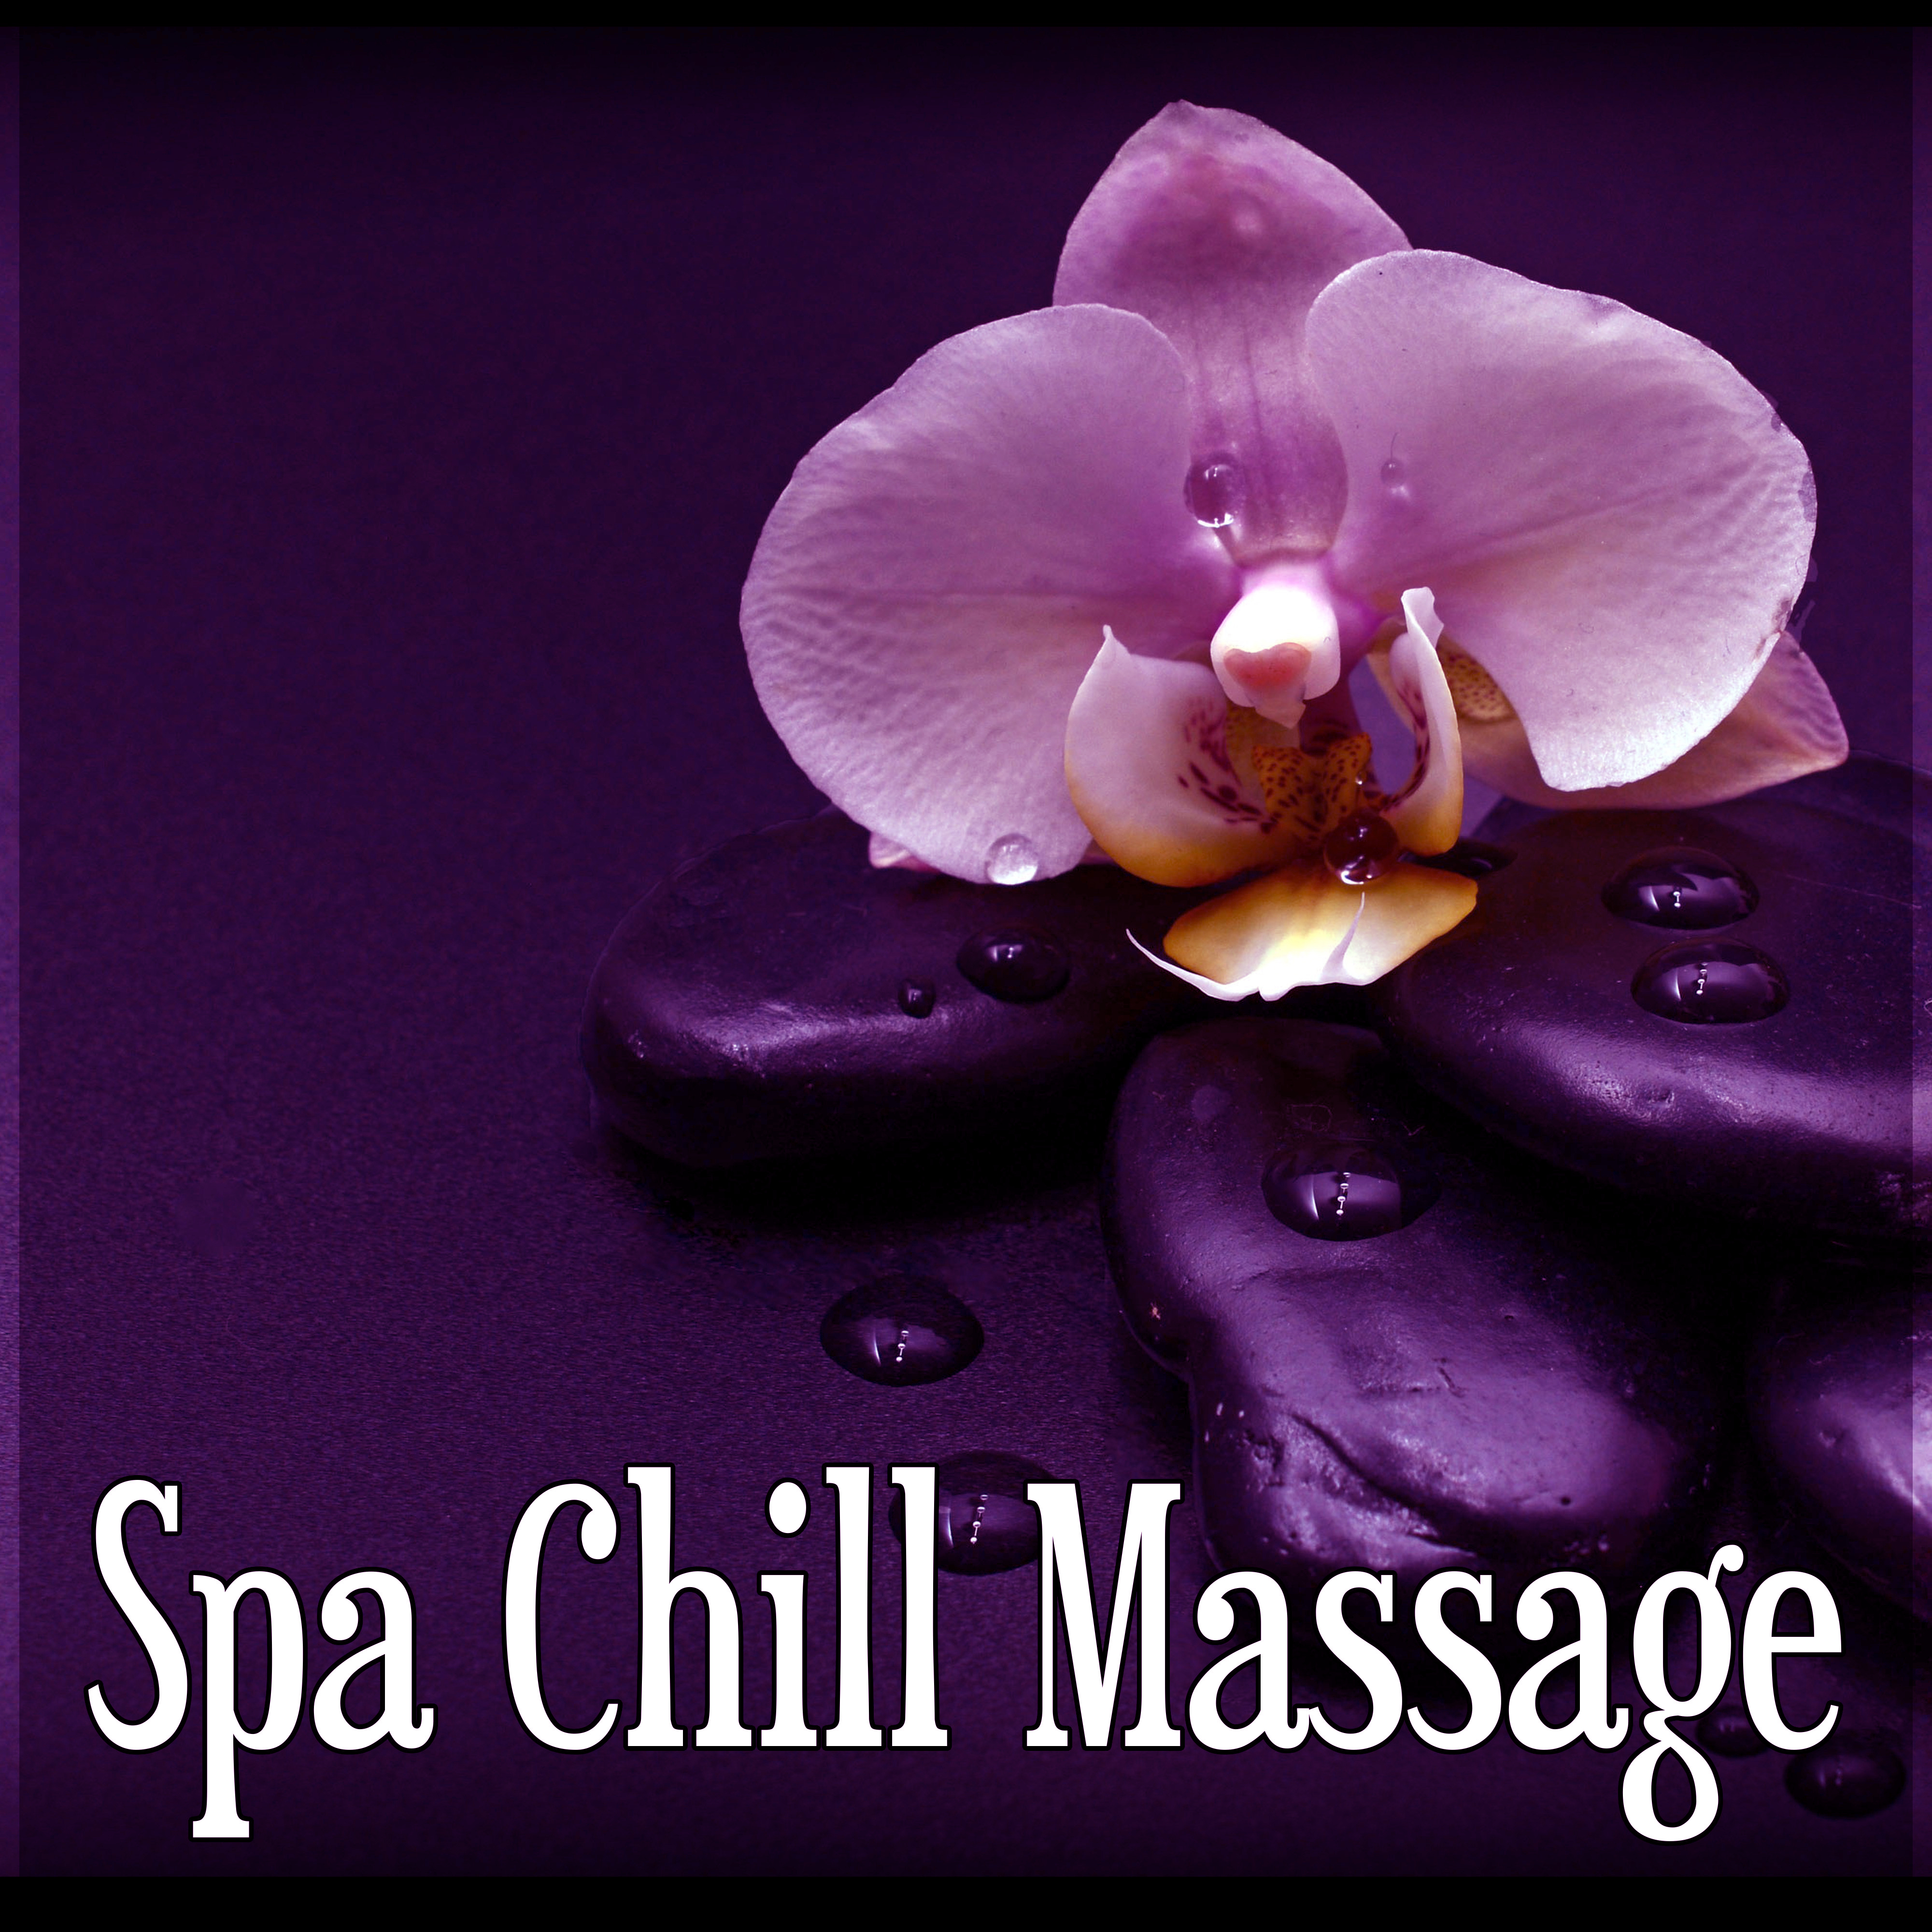 Spa Chill Massage  Spa Massage Moments, Calm Sounds to Relax, Instrumental Music with Nature Sounds for Massage Therapy, Beautiful Songs for Intimate Moments